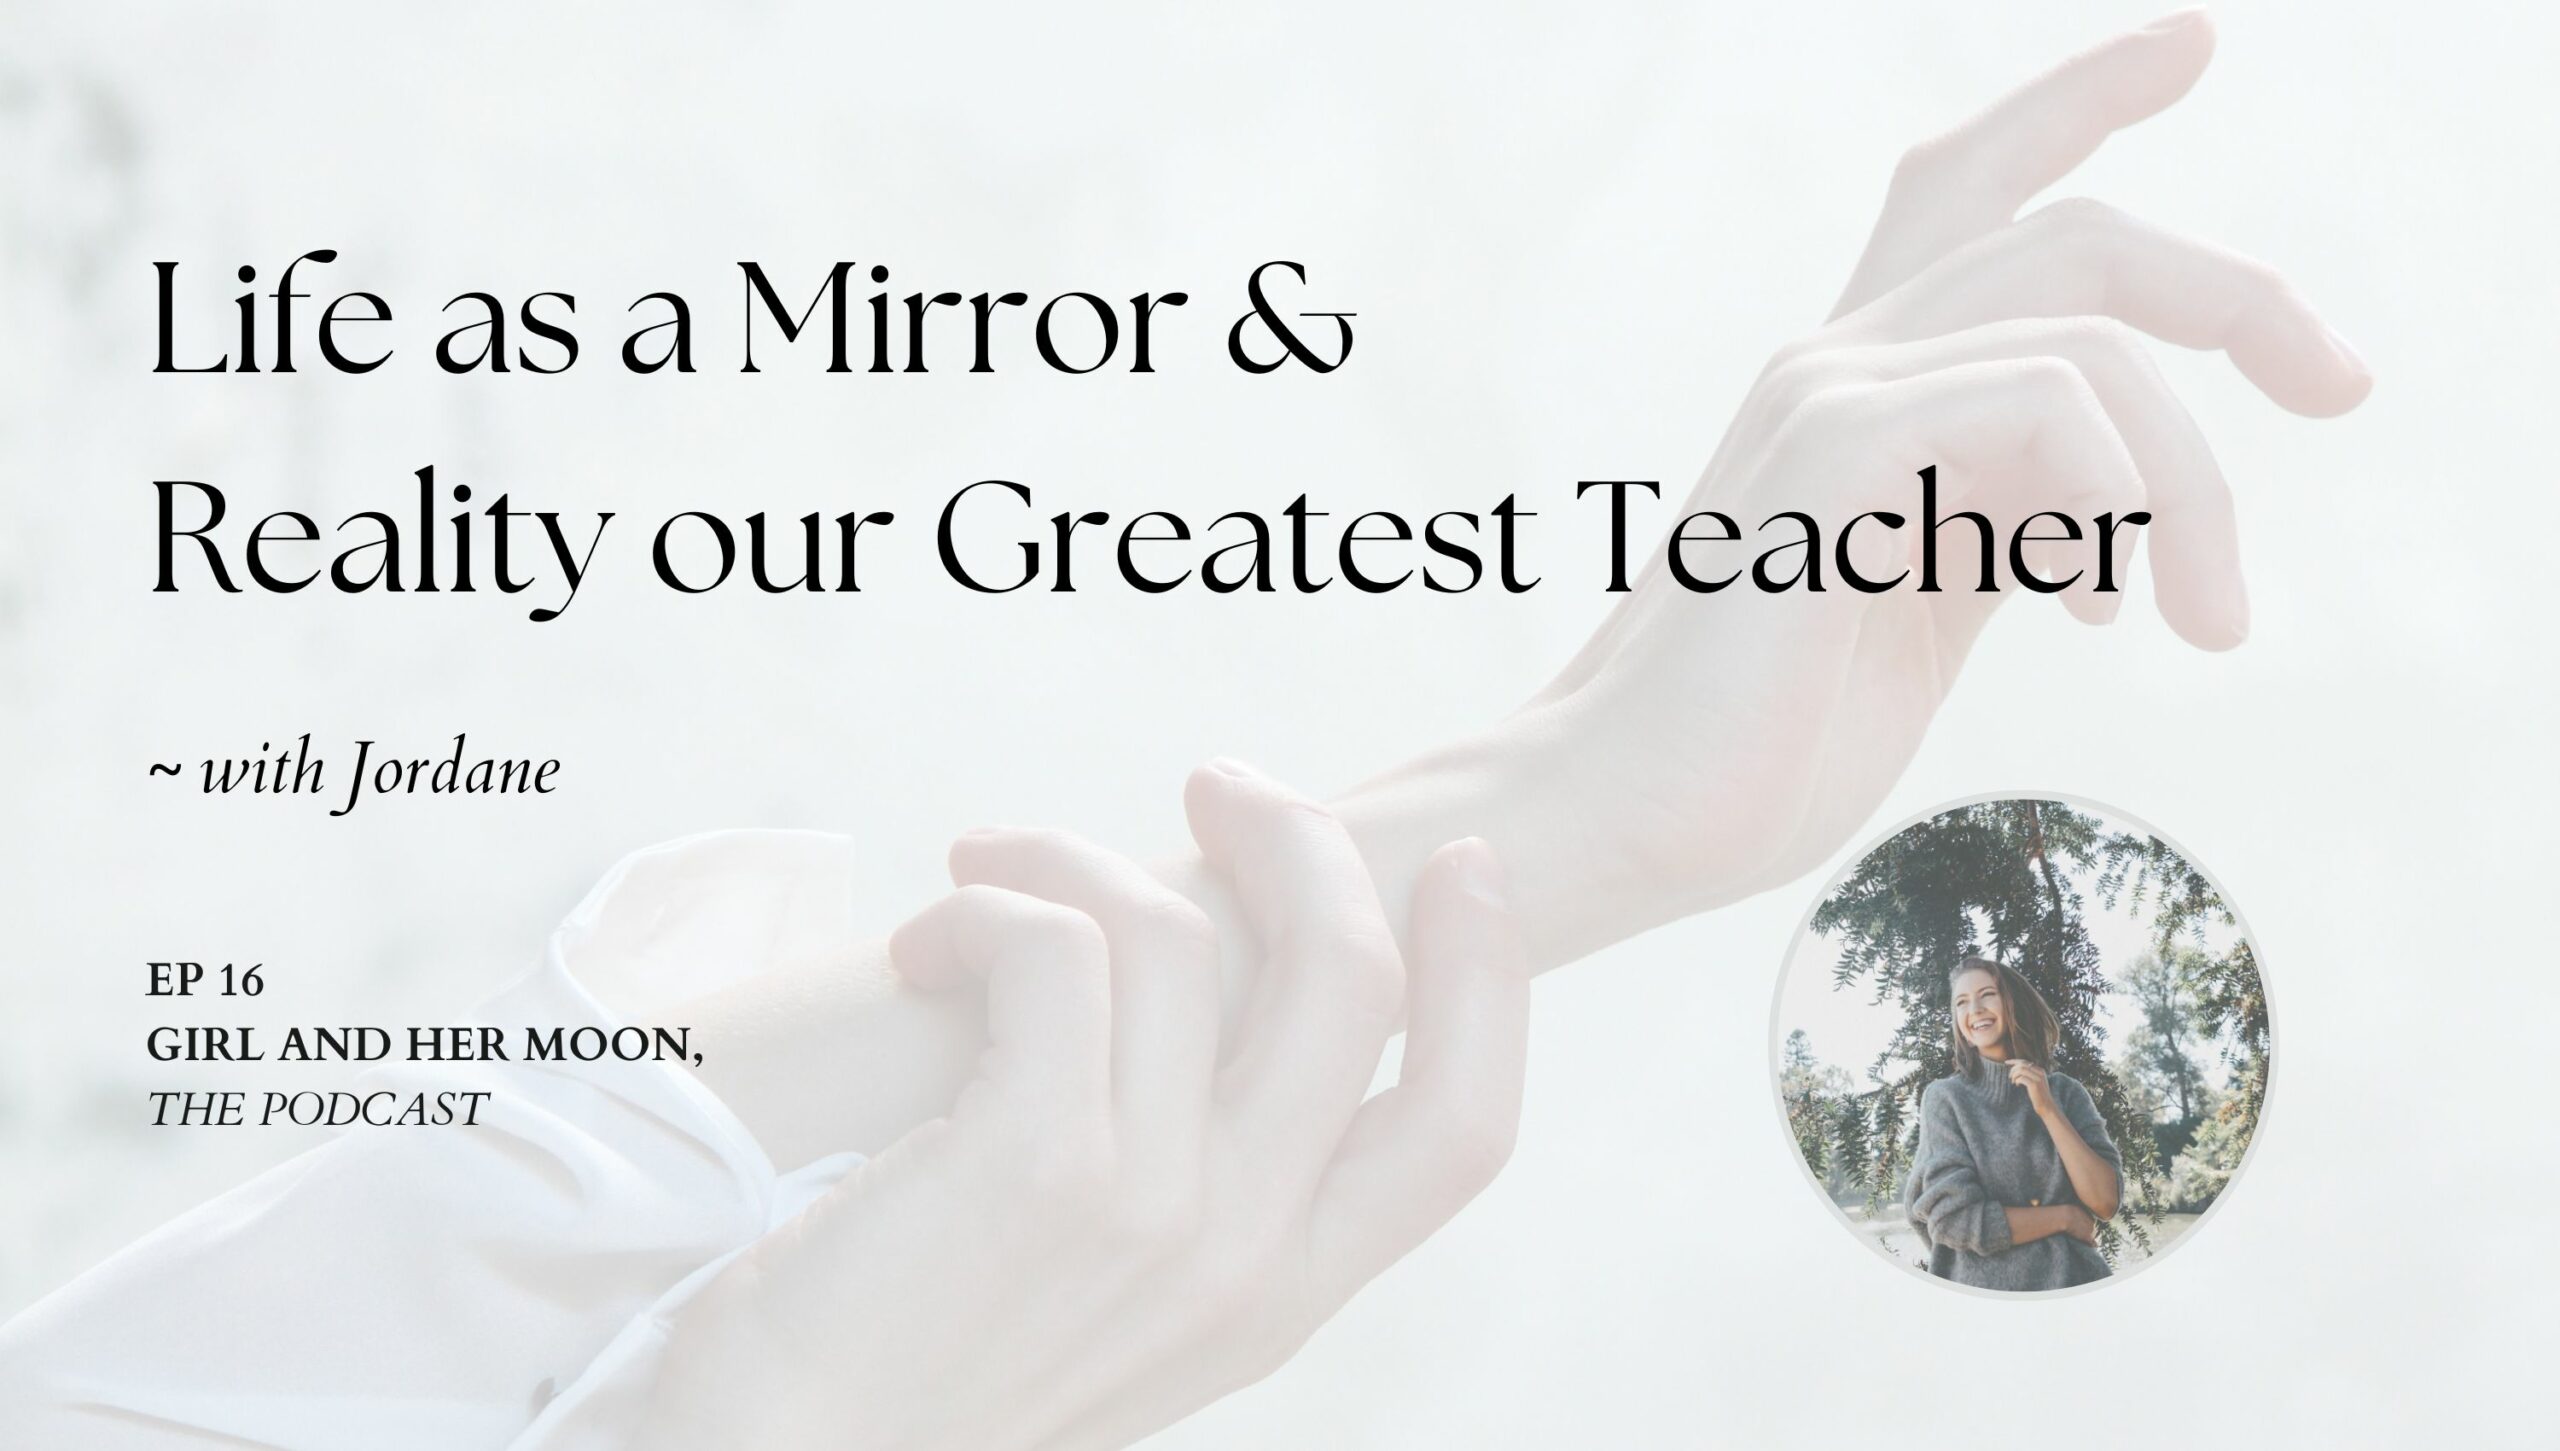 Life as a Mirror & Reality our Greatest Teacher with Jordane Girl and Her Moon the Podcast